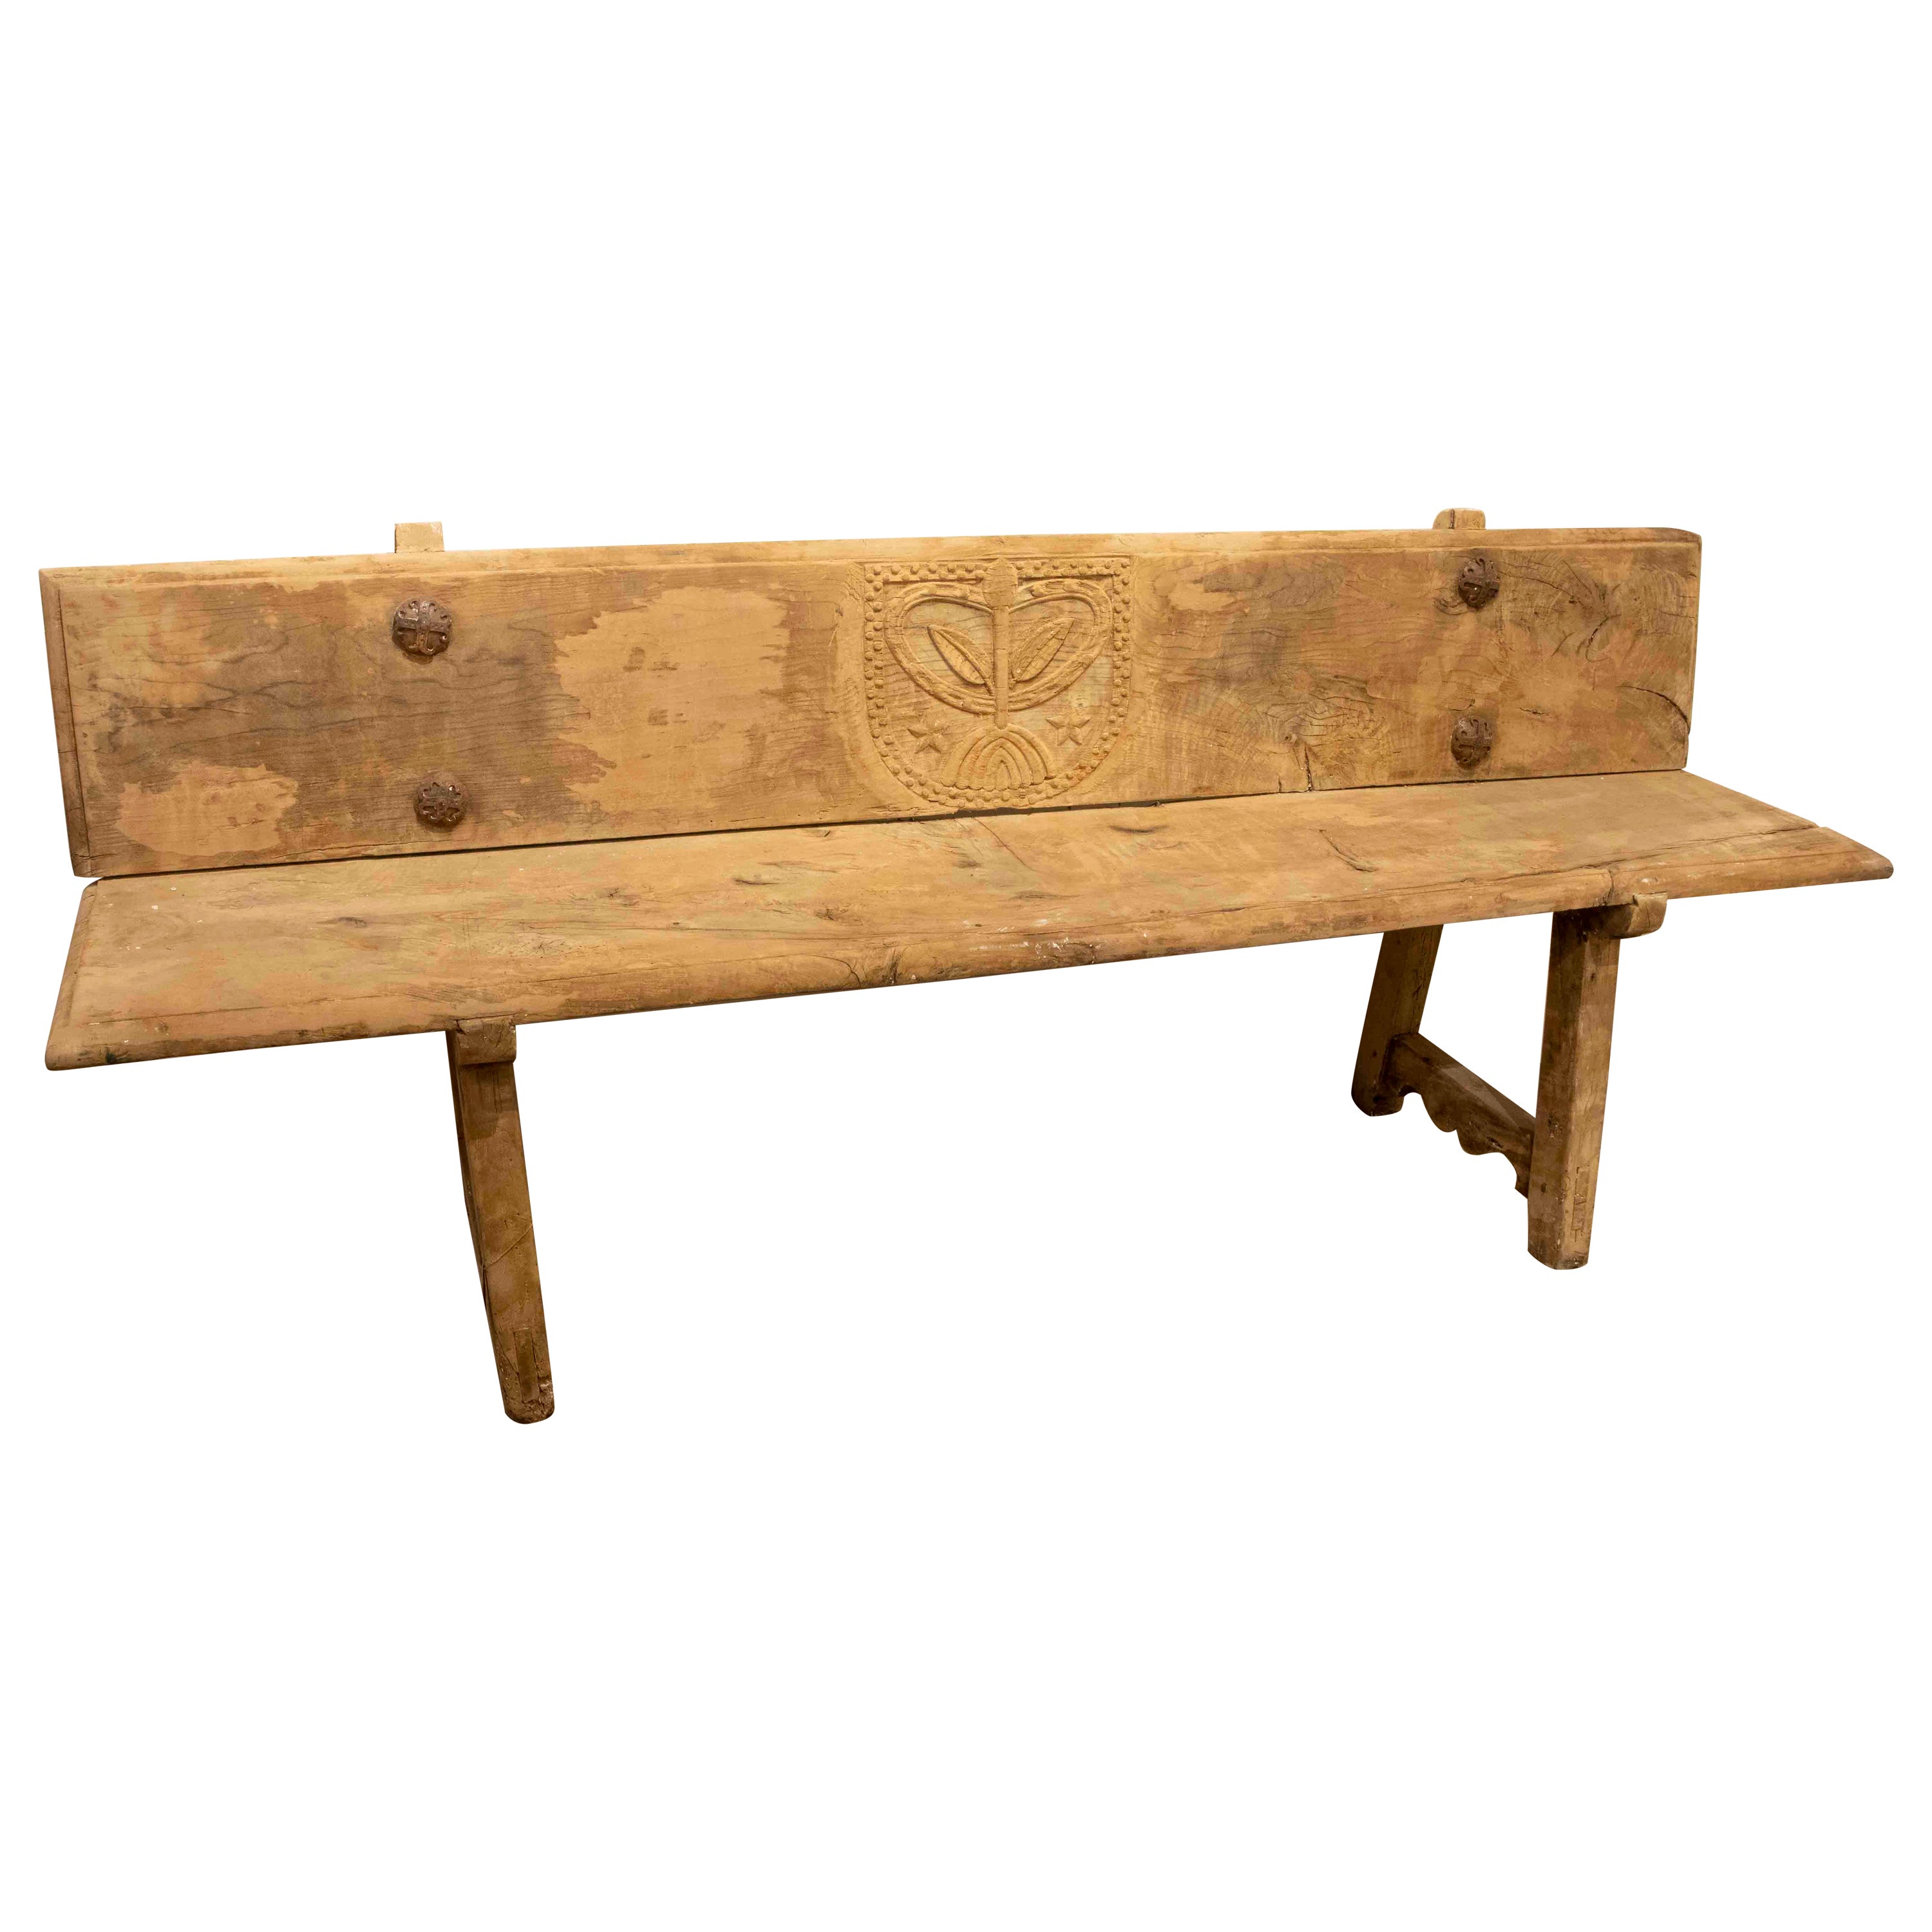 18th century Spanish Pine Wood Bench from a Church with Iron Nails For Sale